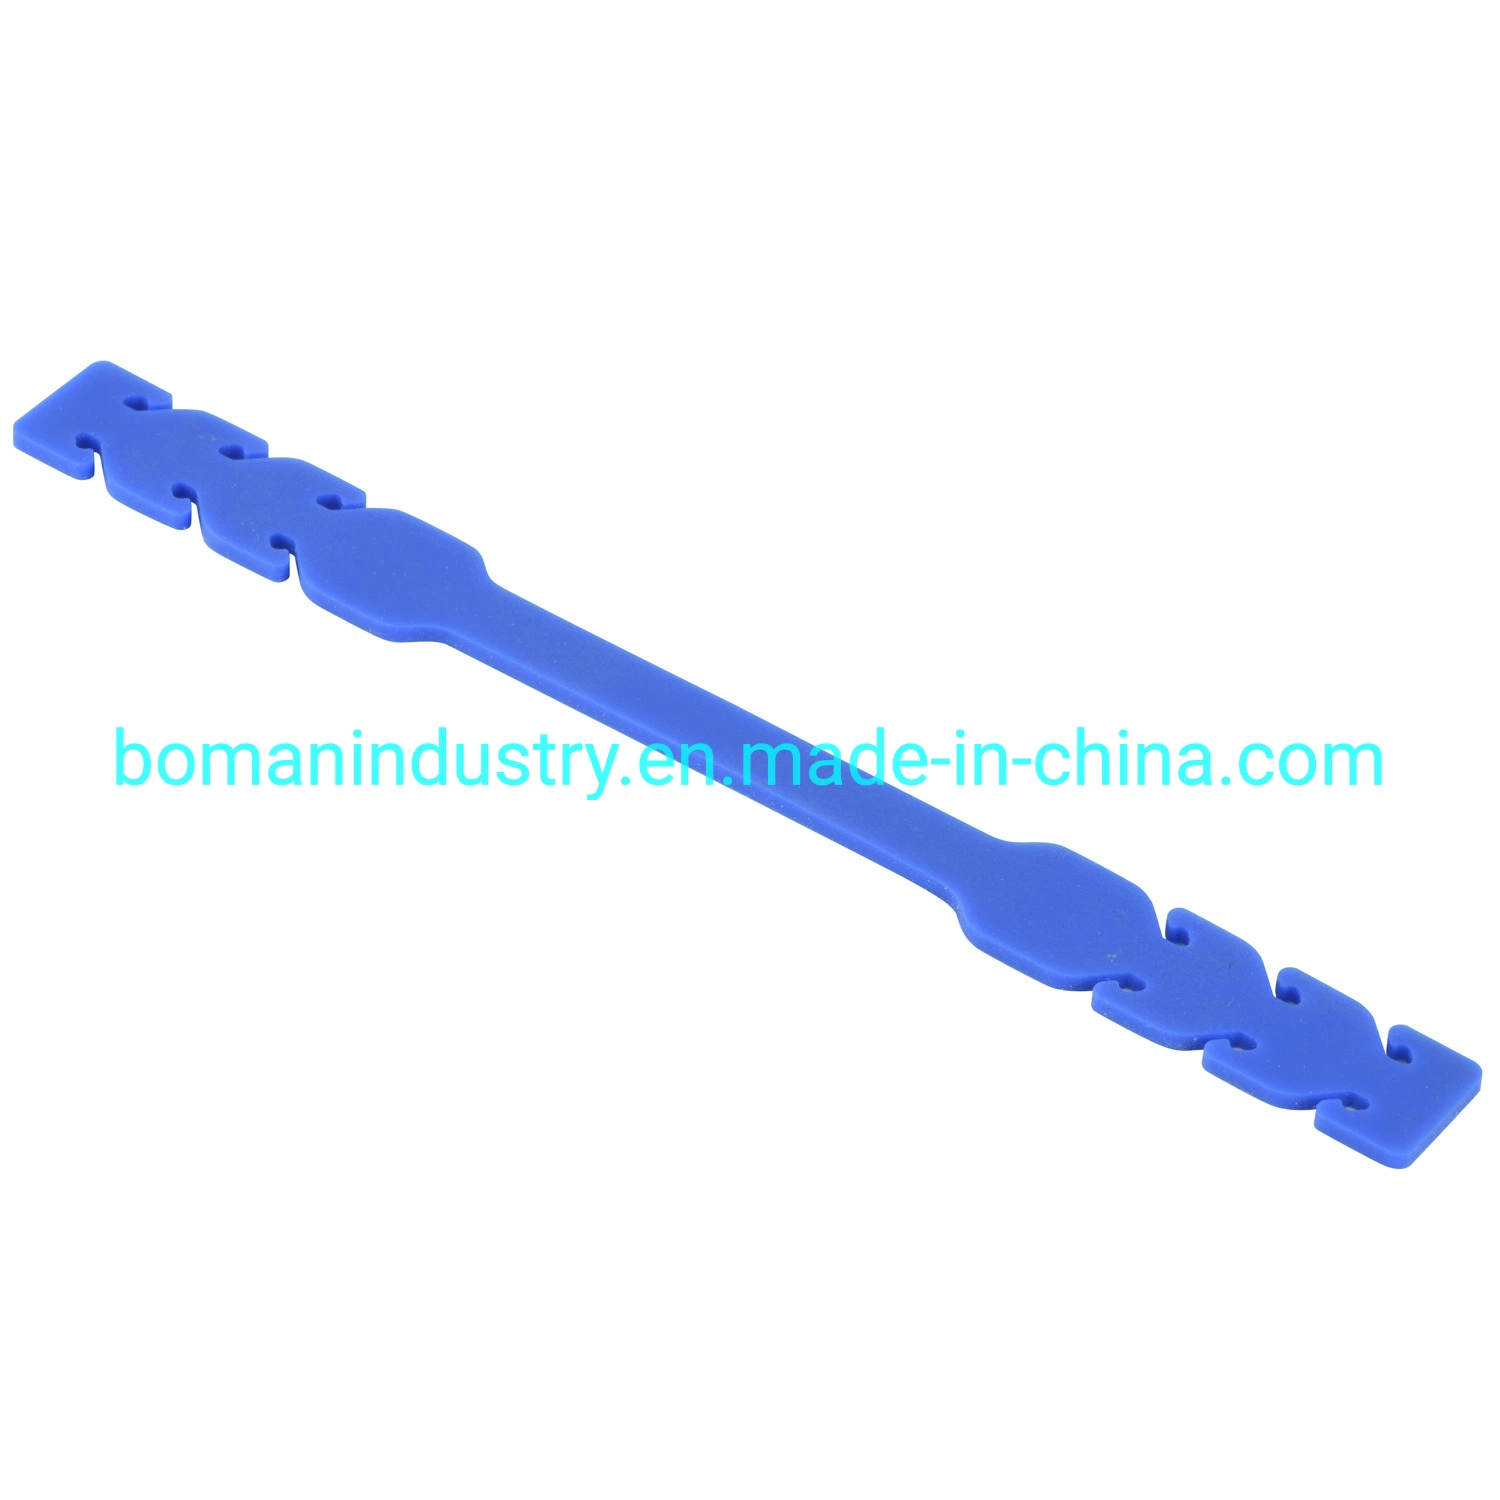 Silicone Rubber Product, Face Mask Strap, Rubber Strap